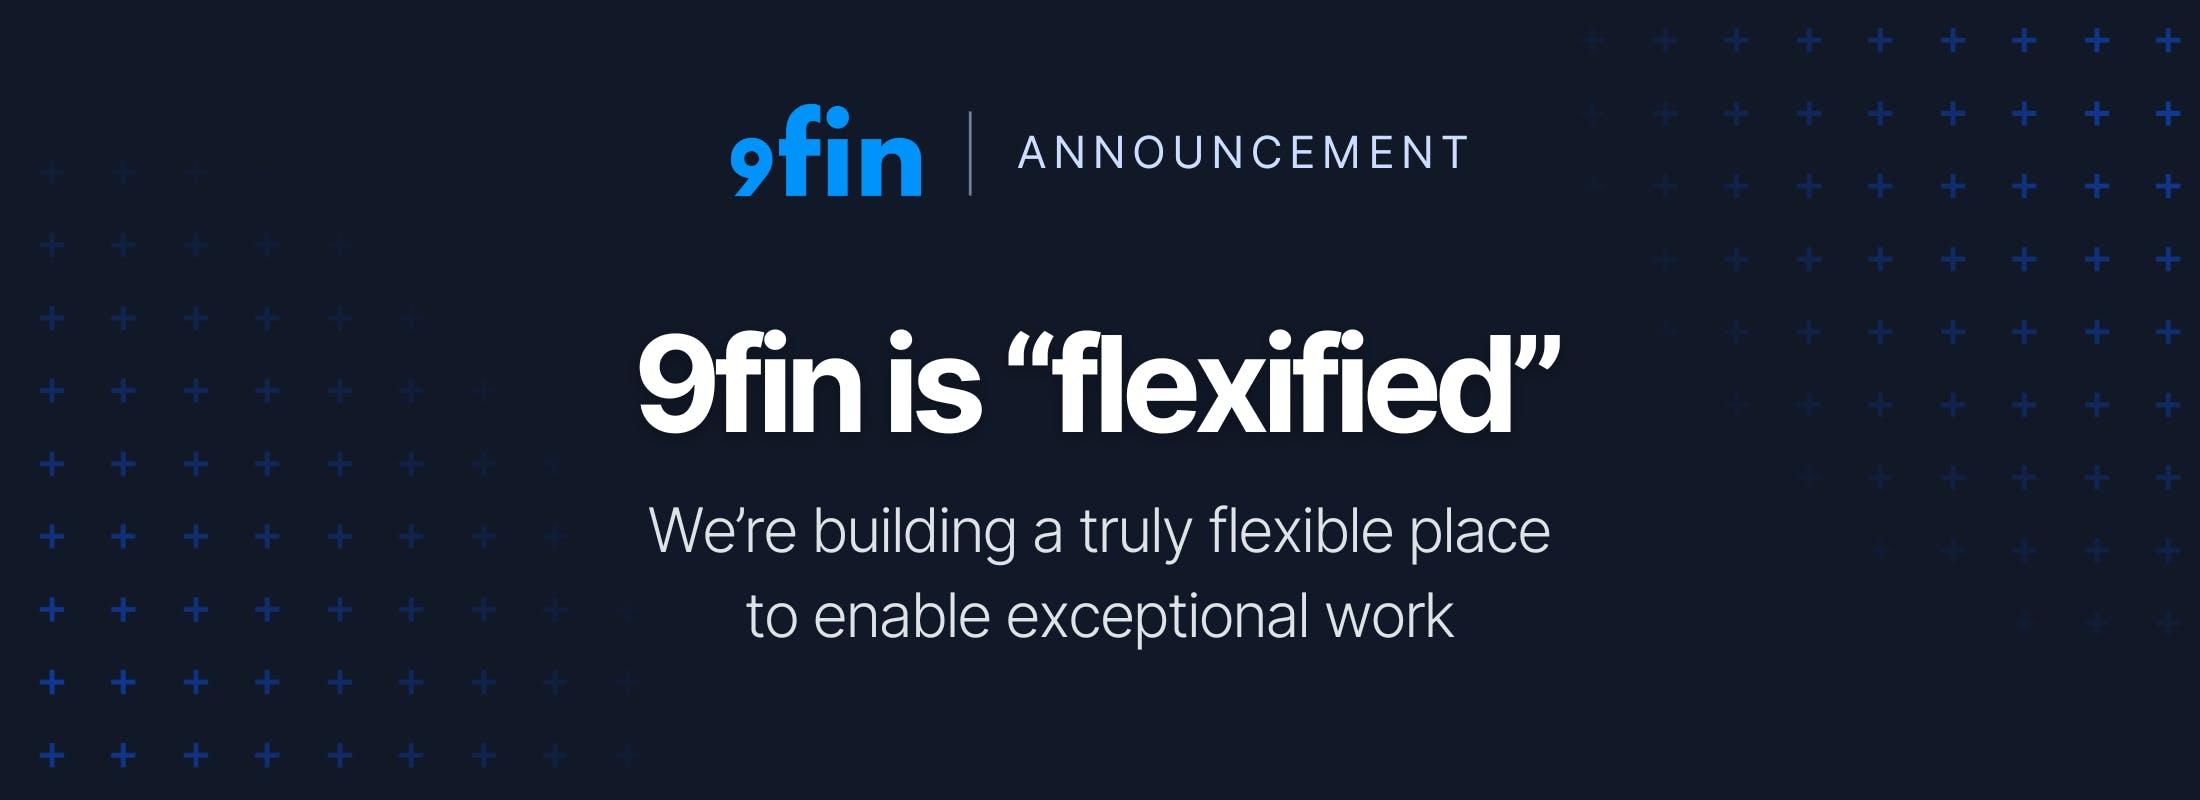 9fin is “flexified” 🎉 We’re building a truly flexible place to enable exceptional work